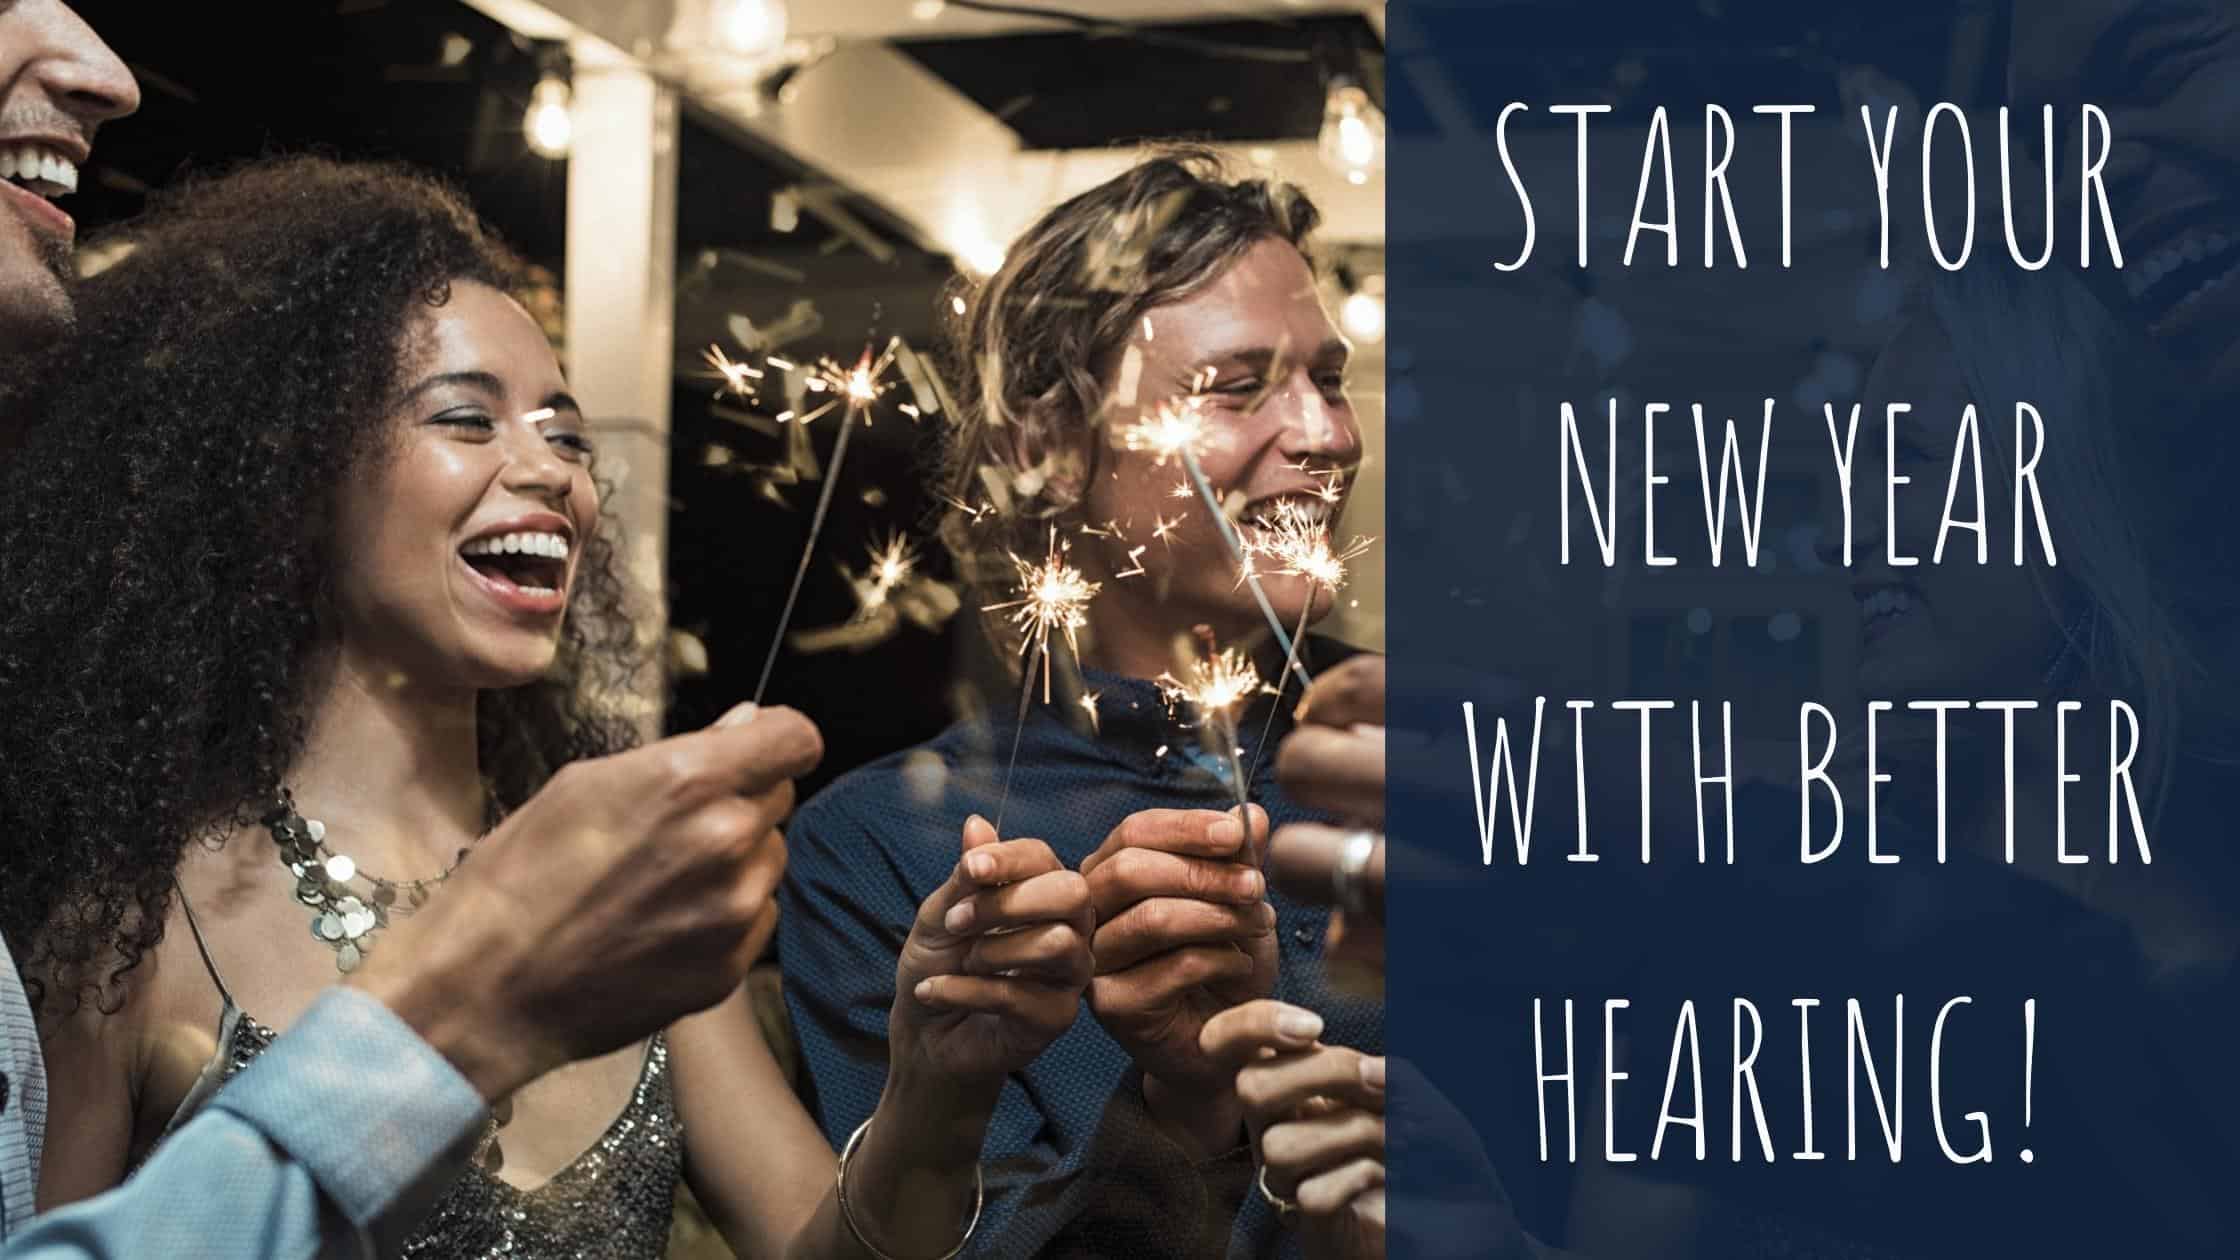 Start Your New Year with Better Hearing!